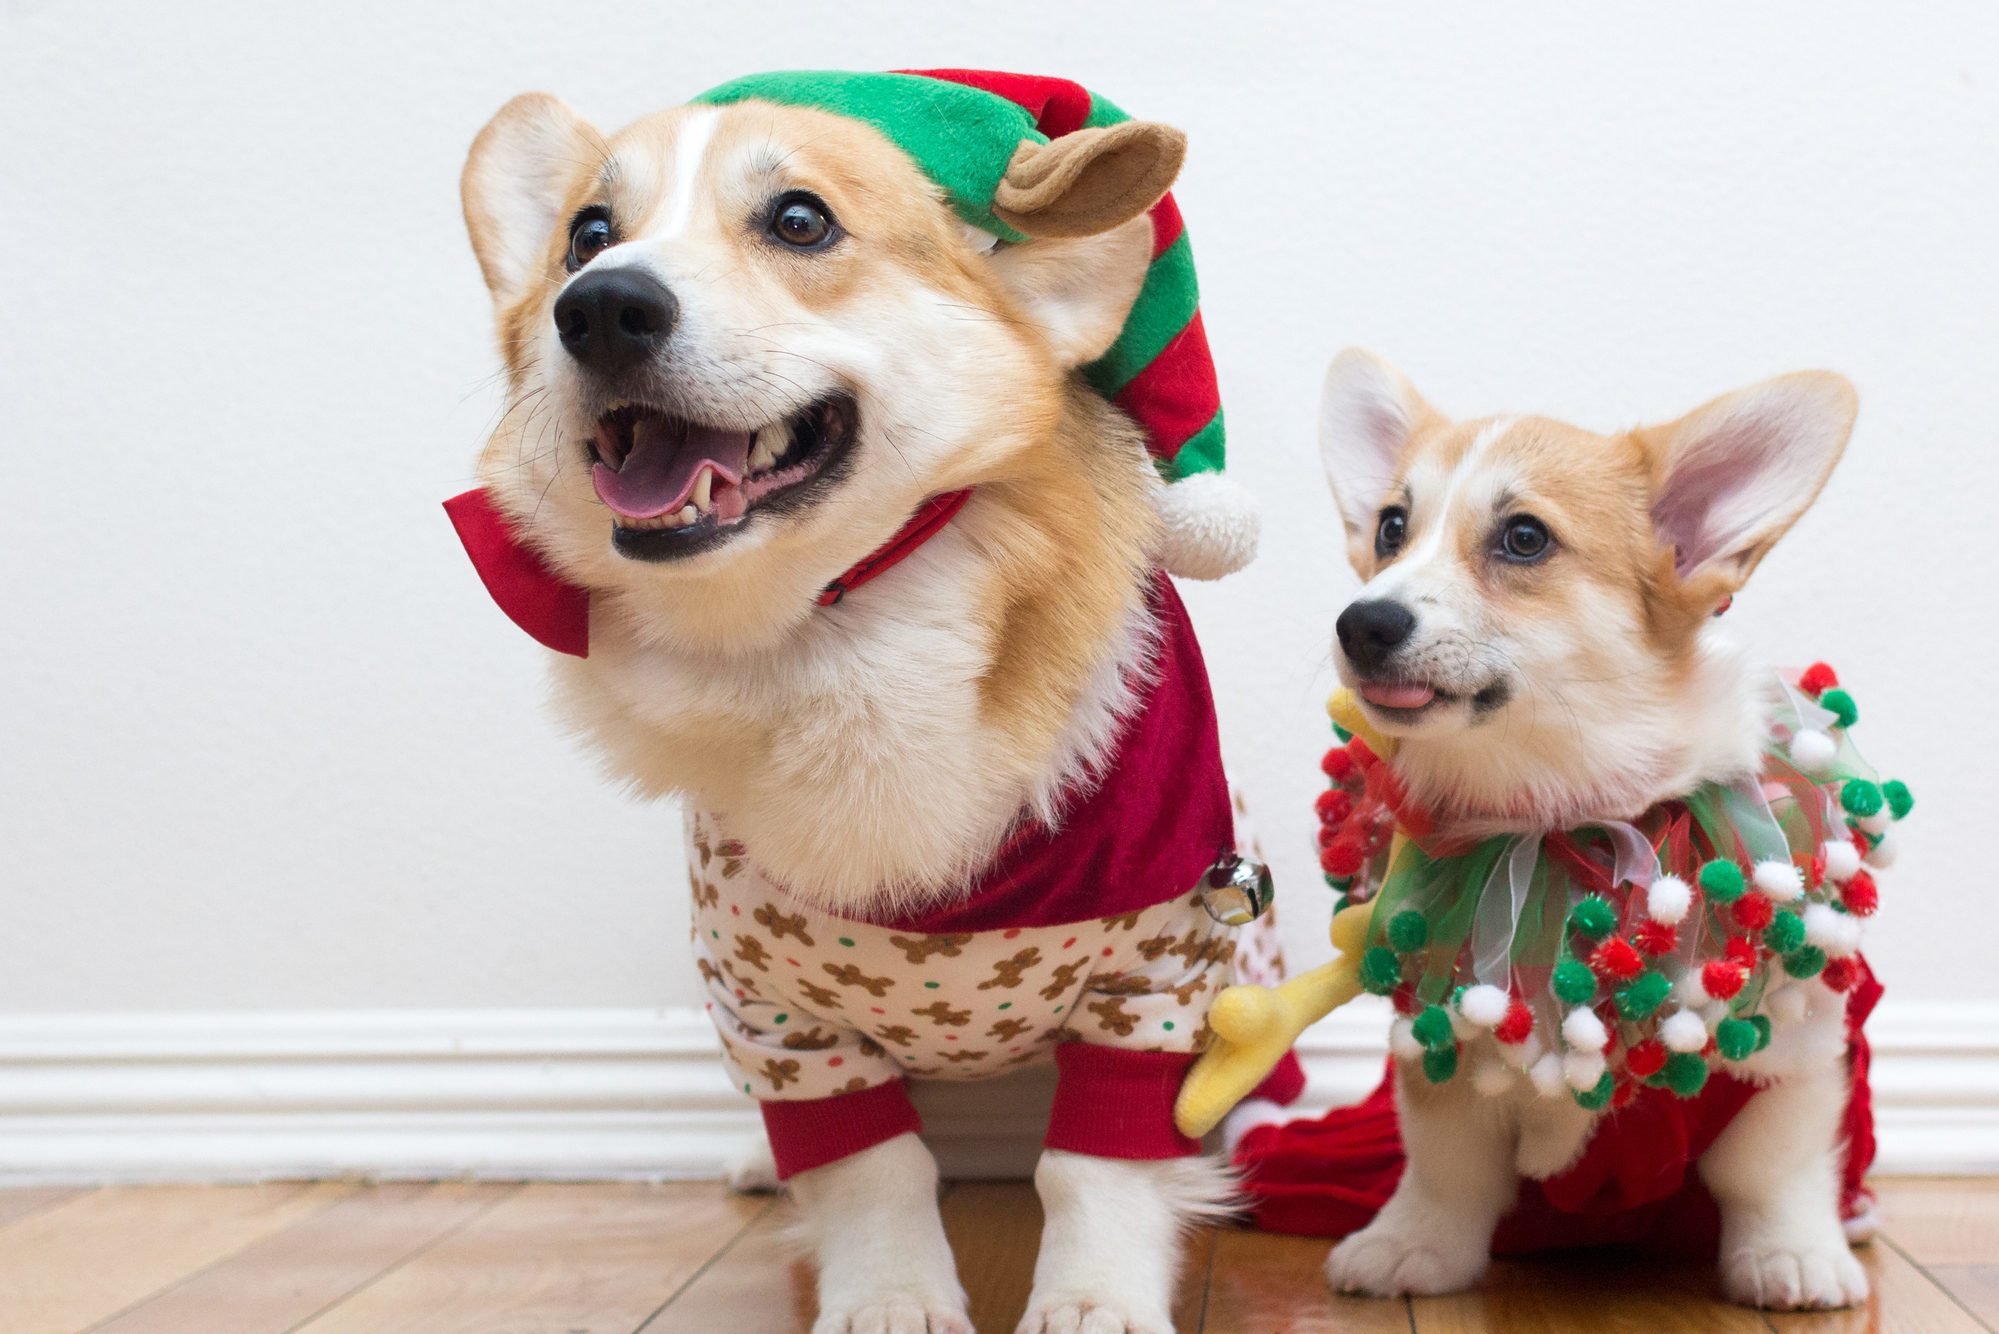 of the Cutest Corgi Picture. Reader's Digest